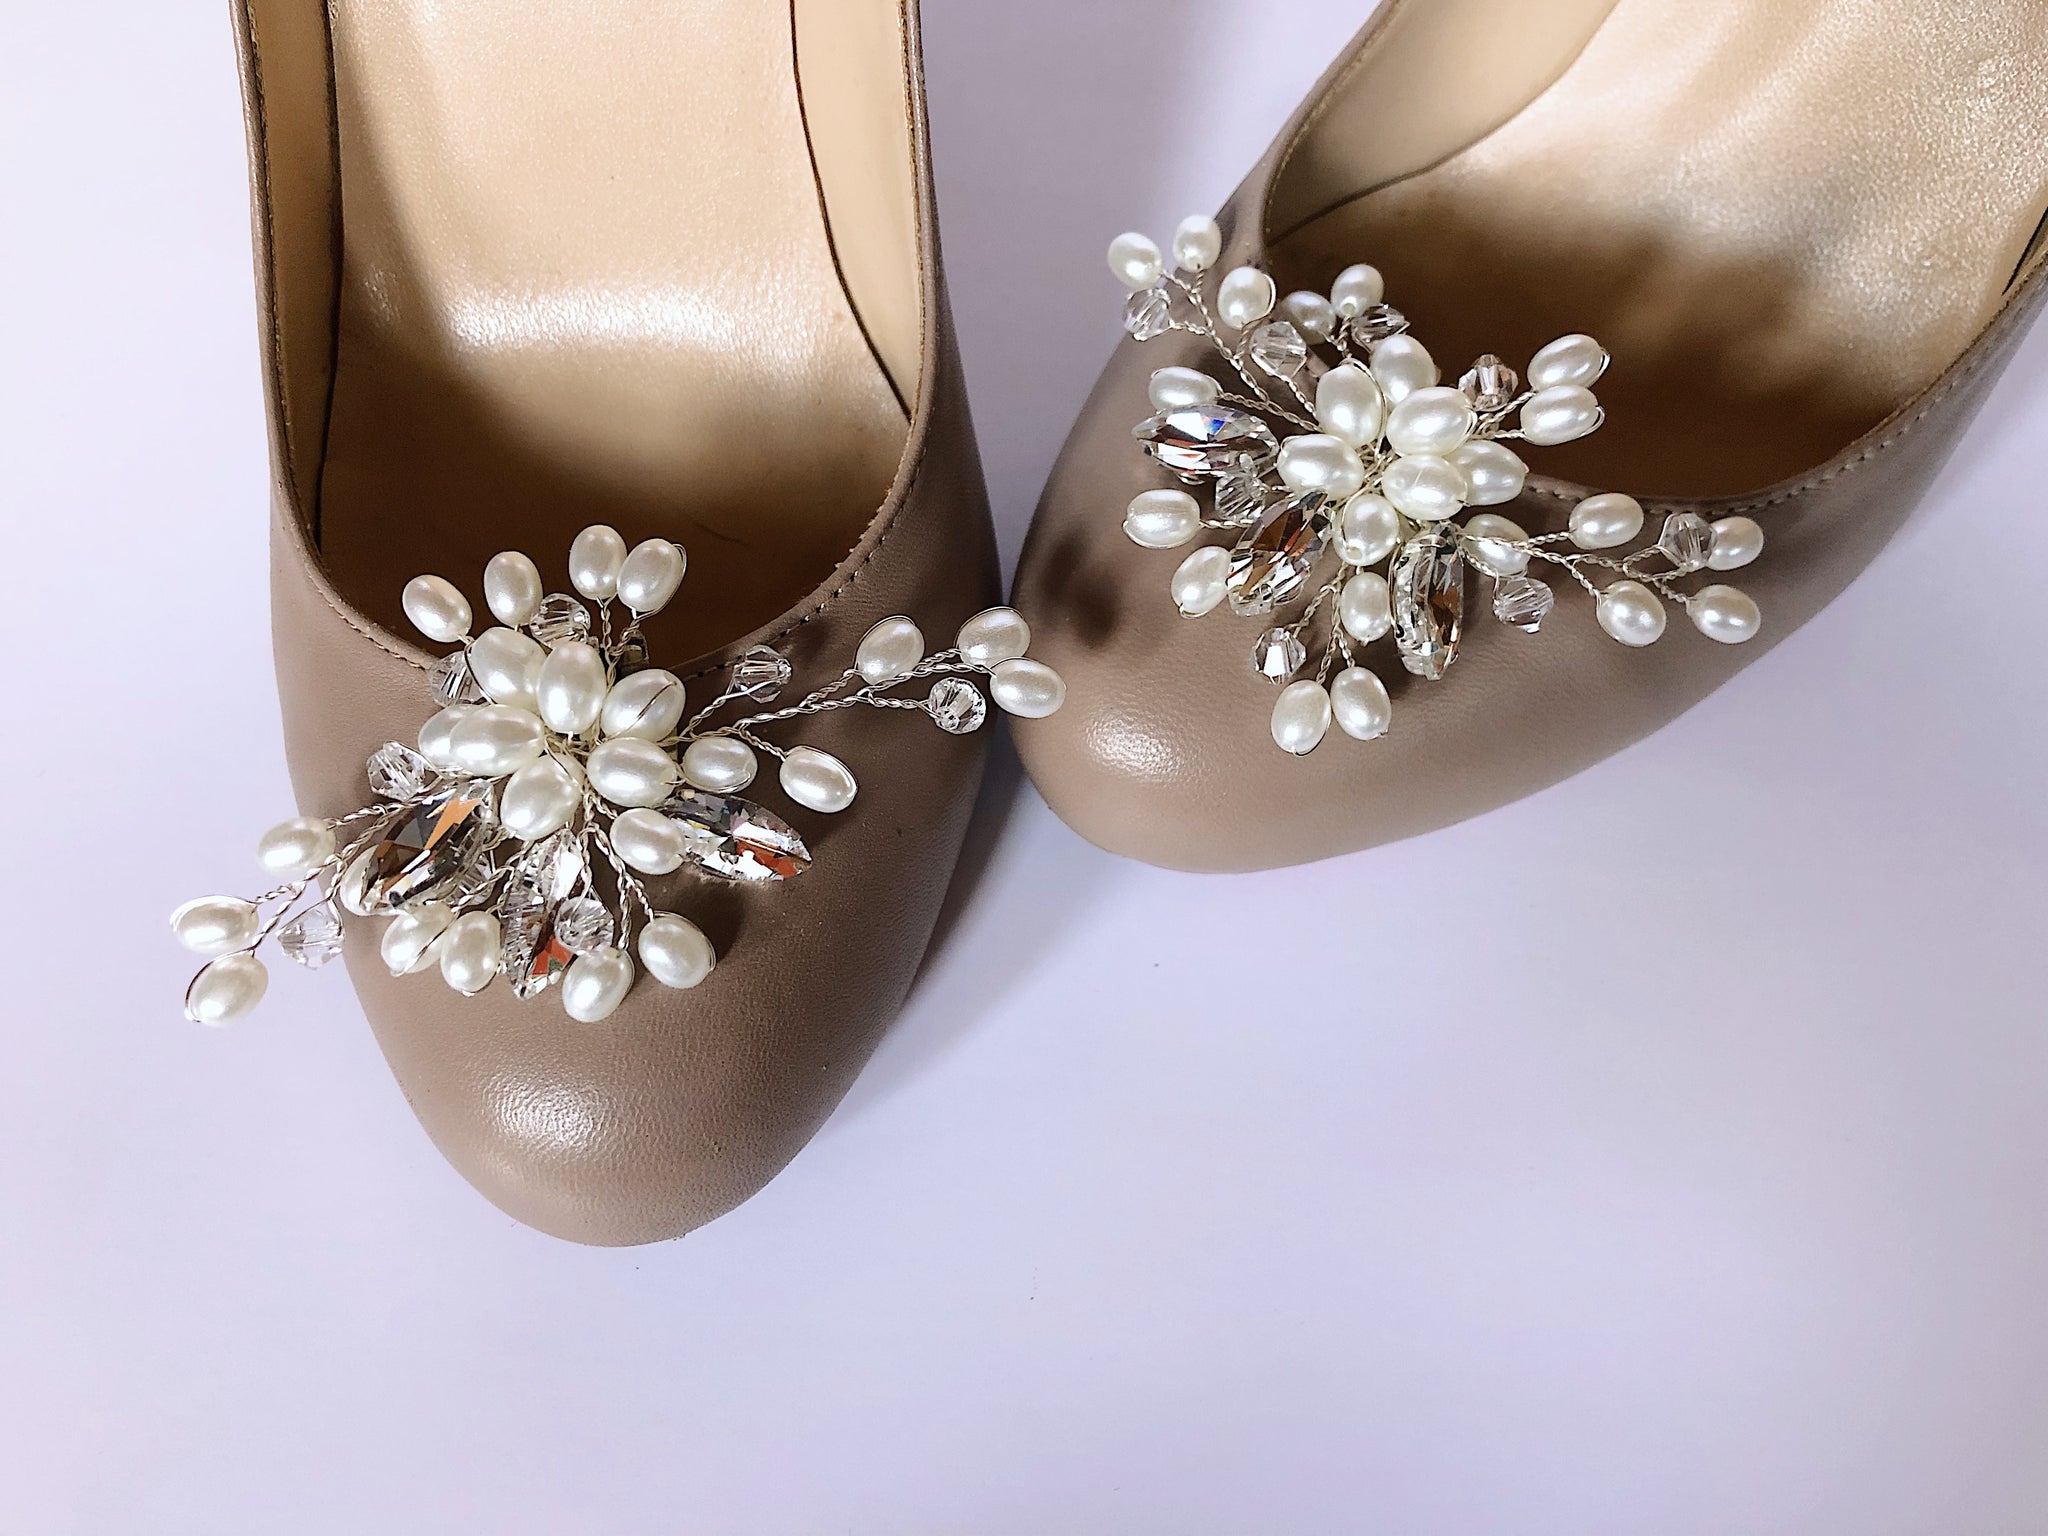 Shoes buckles with pearls